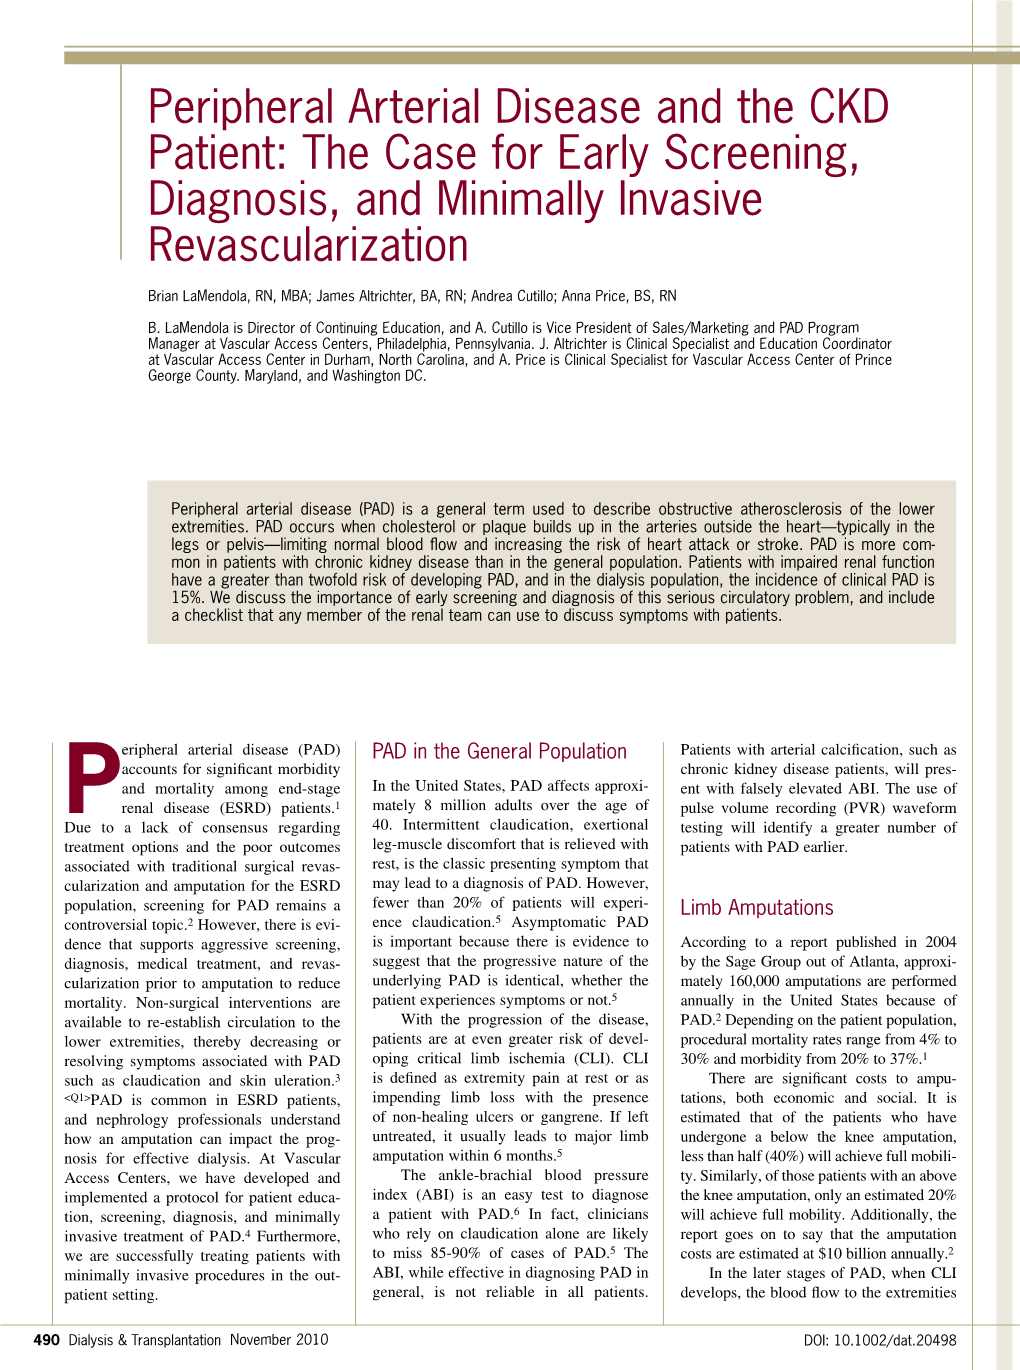 Peripheral Arterial Disease and the CKD Patient: the Case for Early Screening, Diagnosis, and Minimally Invasive Revascularization